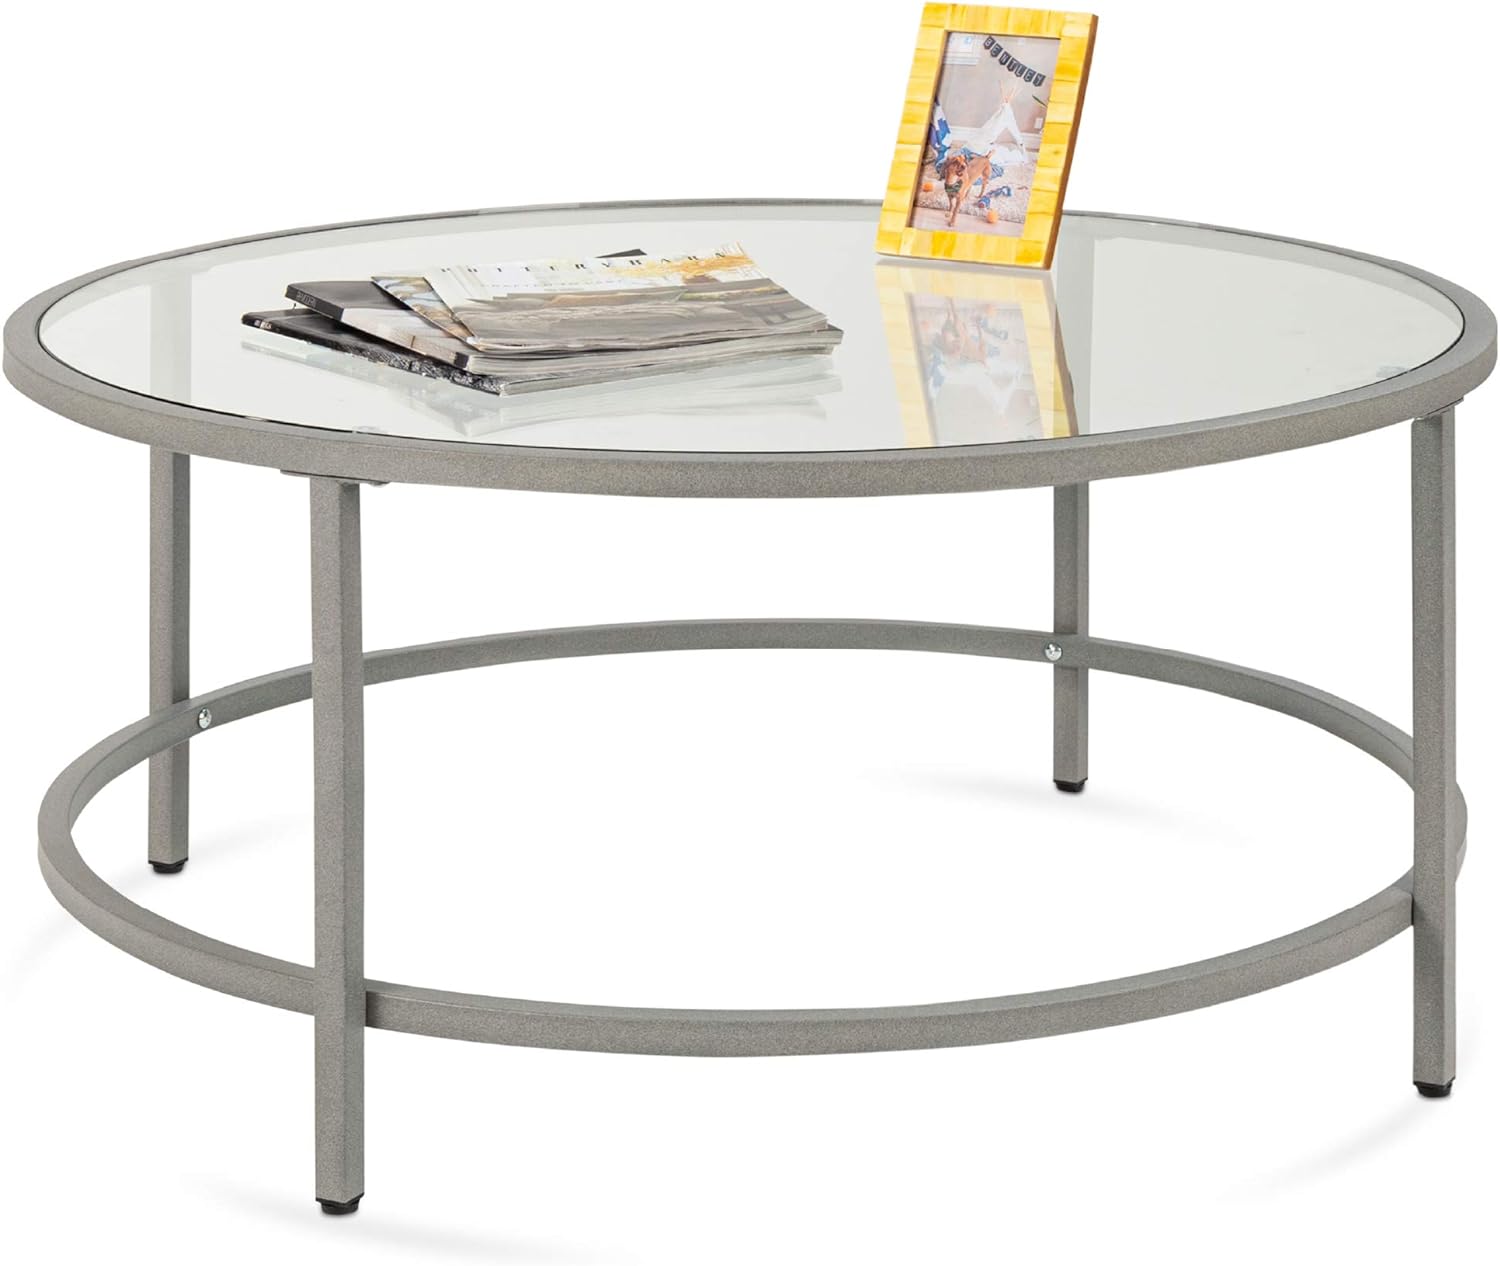 Best Choice Products 36in Modern Round Tempered Glass Accent Side Coffee Table for Living Room, Dining Room, Tea, Home Dcor w/Metal Frame, Non-Marring Foot Caps - Gray